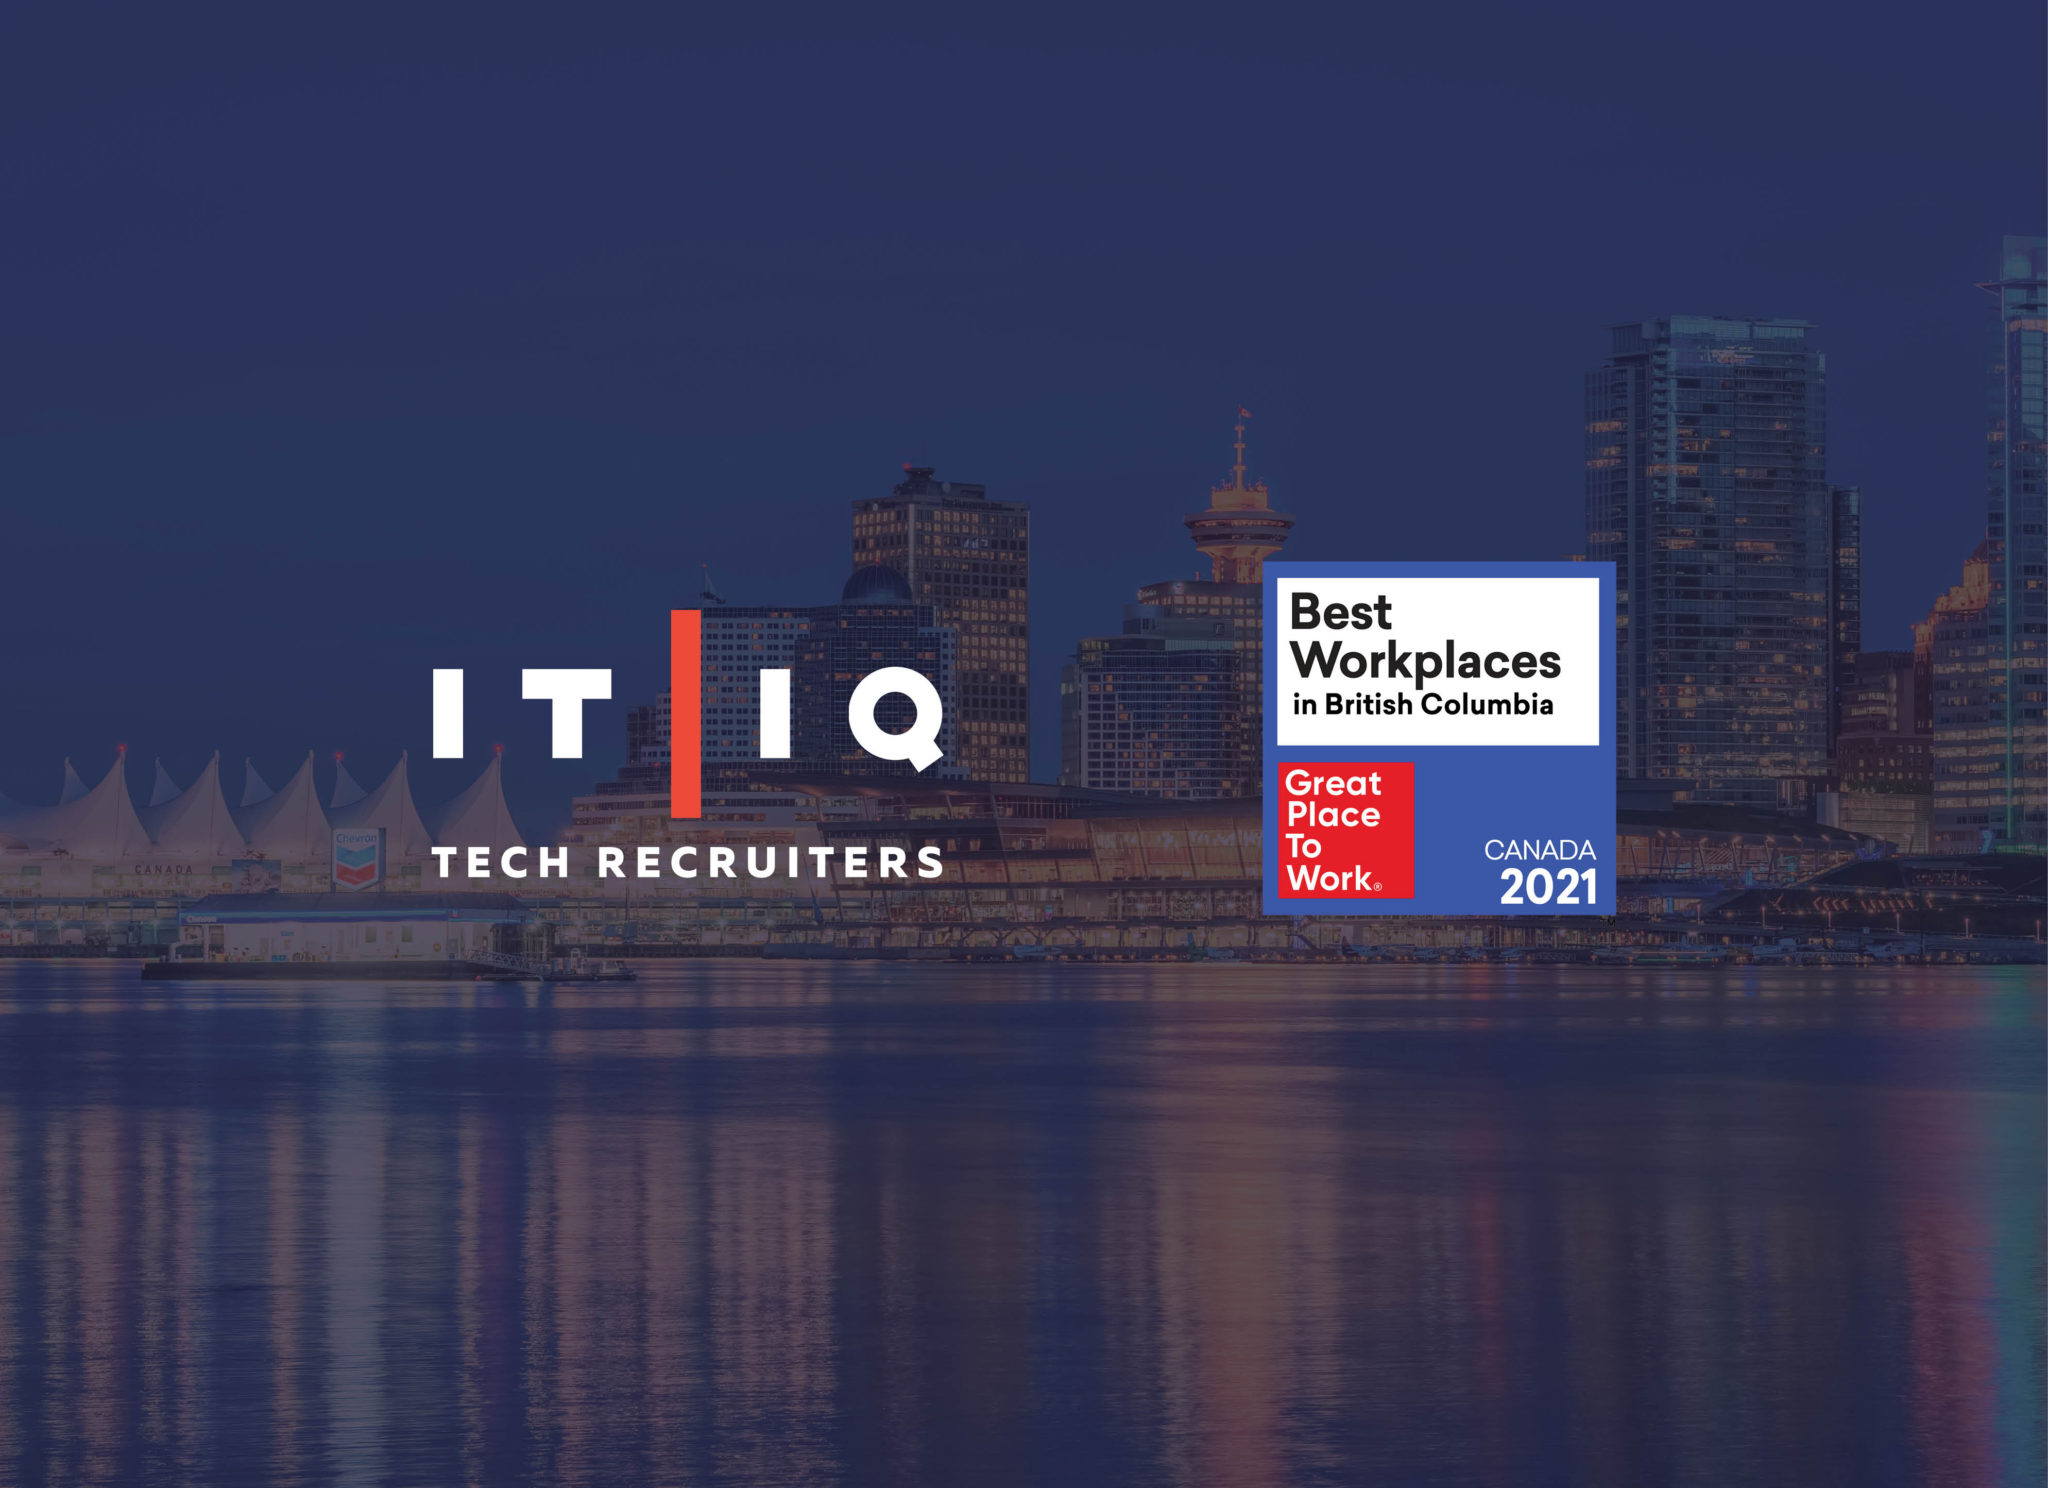 IT/IQ Tech Recruiters Named One of the "Best Workplaces in British Columbia" Canada 2021 Press Release Graphic